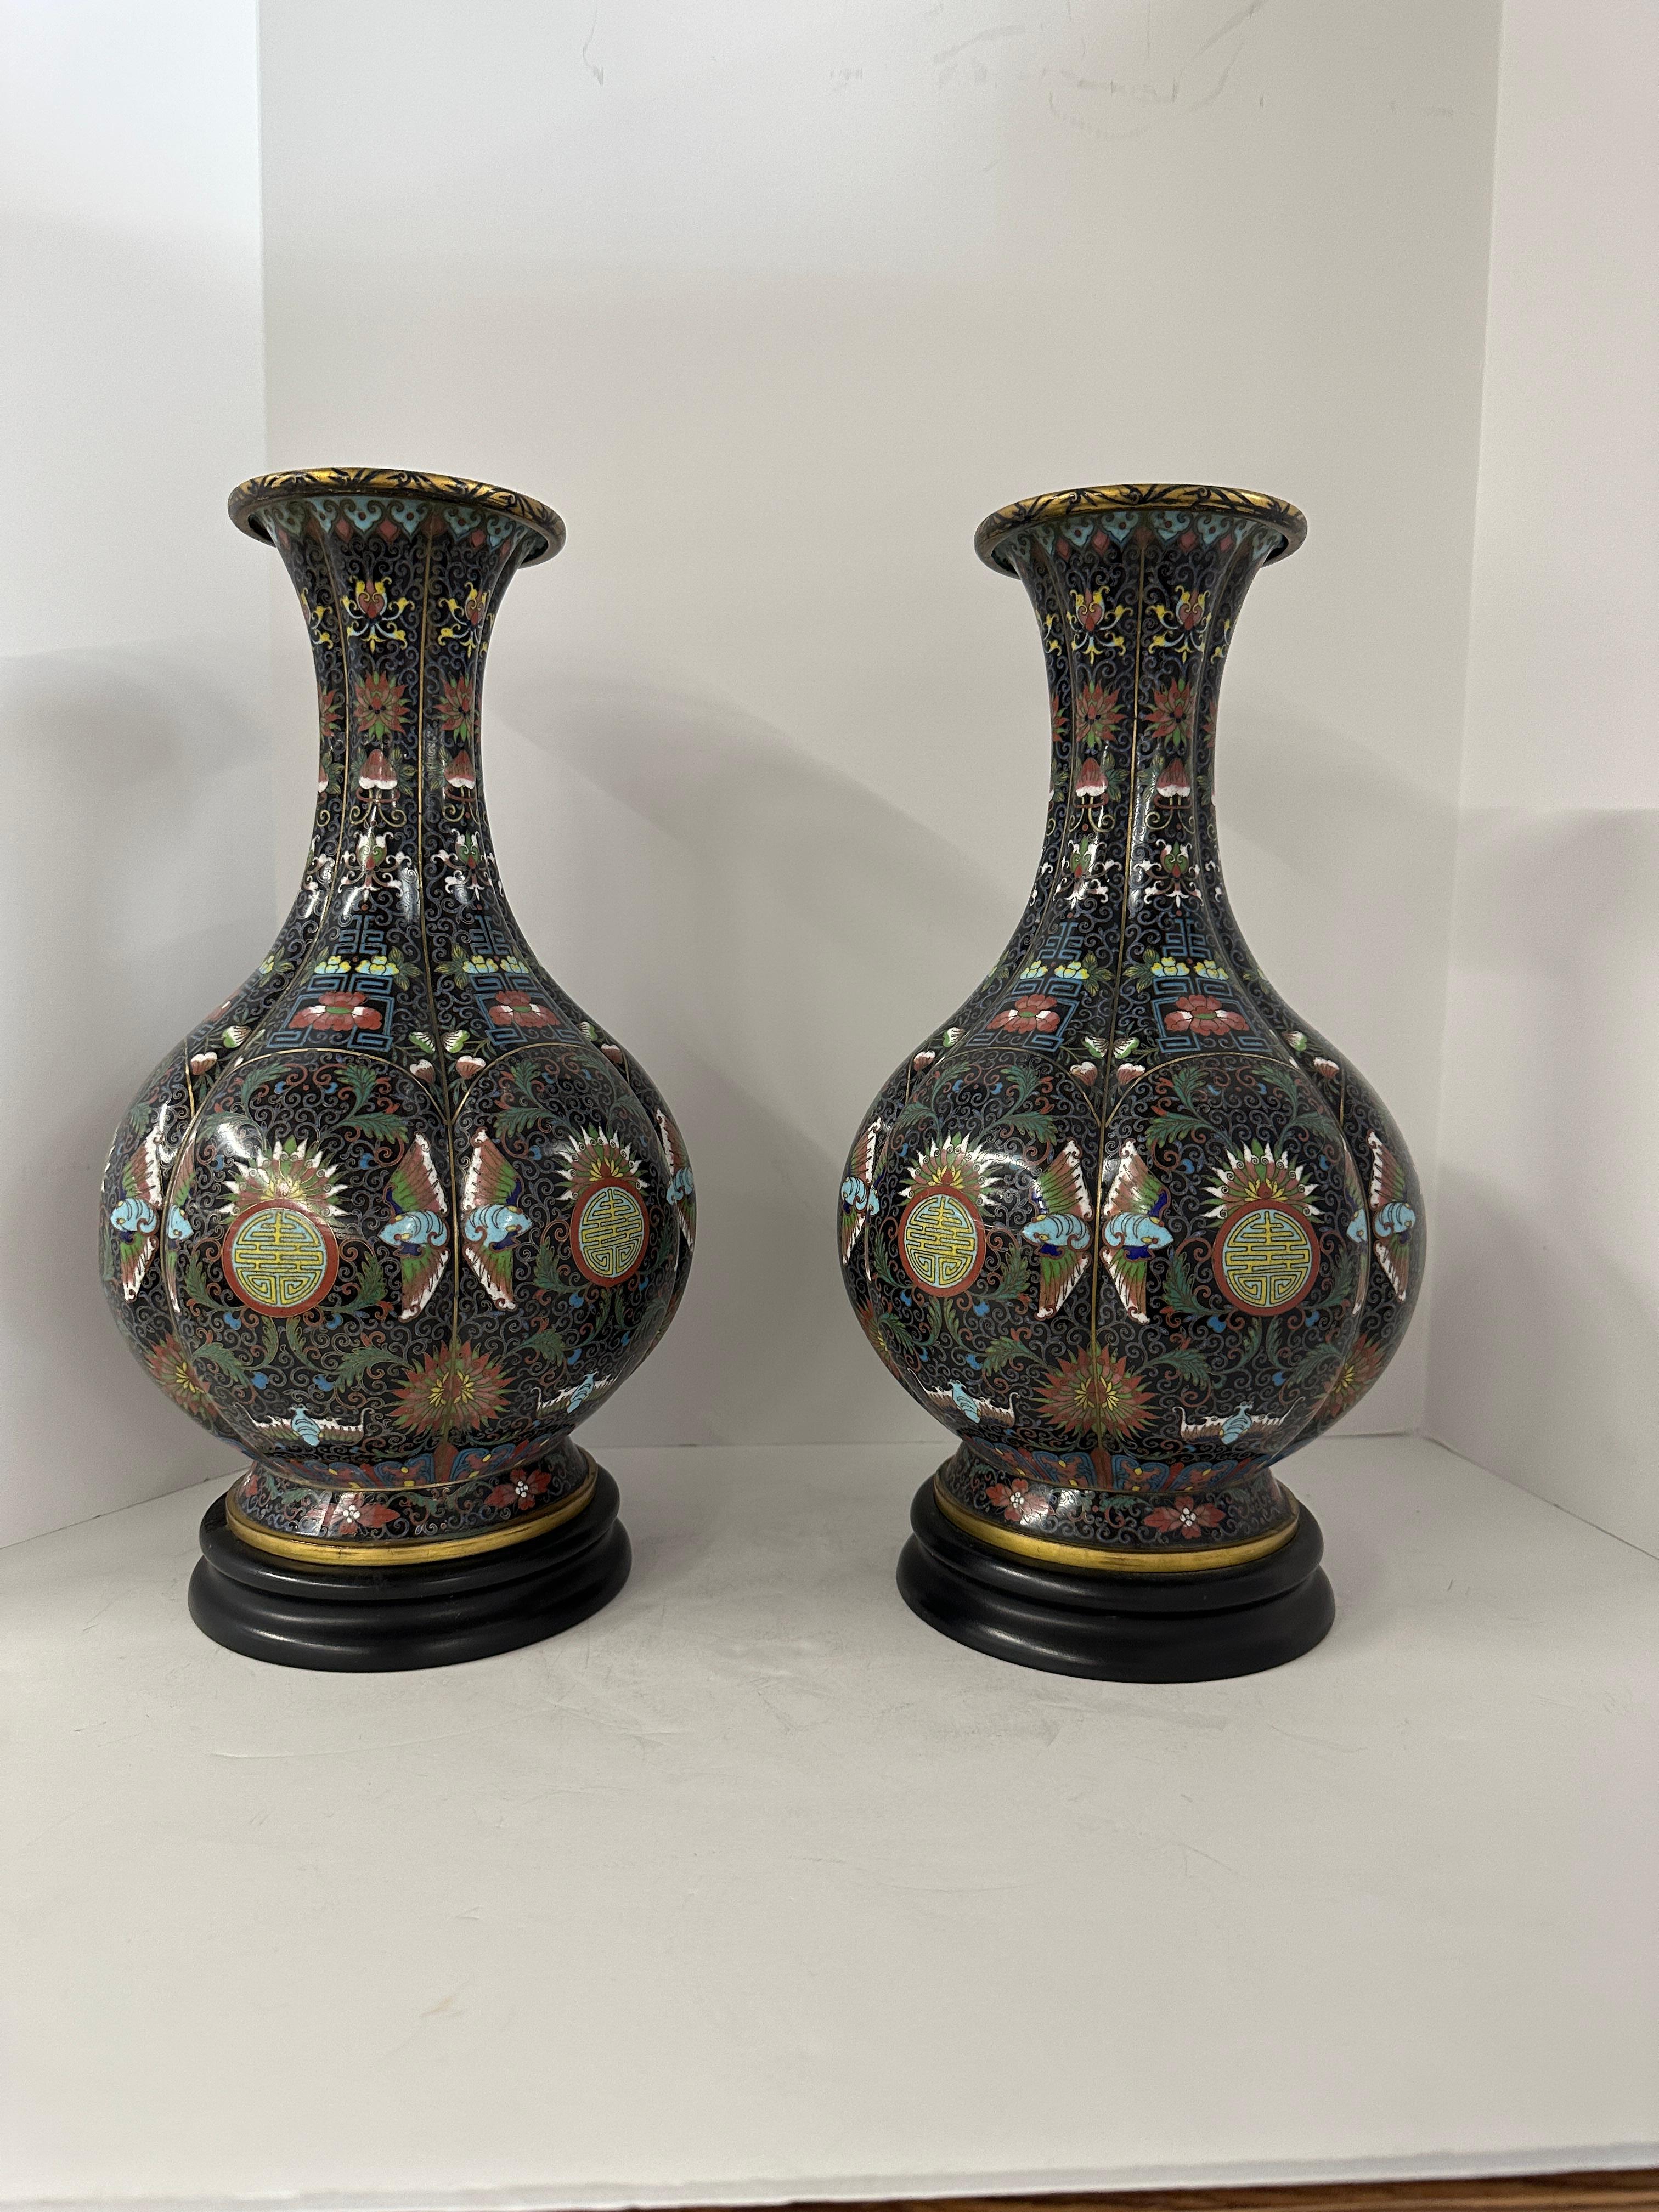 A lovely pair of Chinese Cloisonné vases that are identified as 19th century with an old antique shop tag on the bottoms. We acquire these out of a beautiful Palm Springs Estate and they were configure as lamps. The original wiring  and fixtures